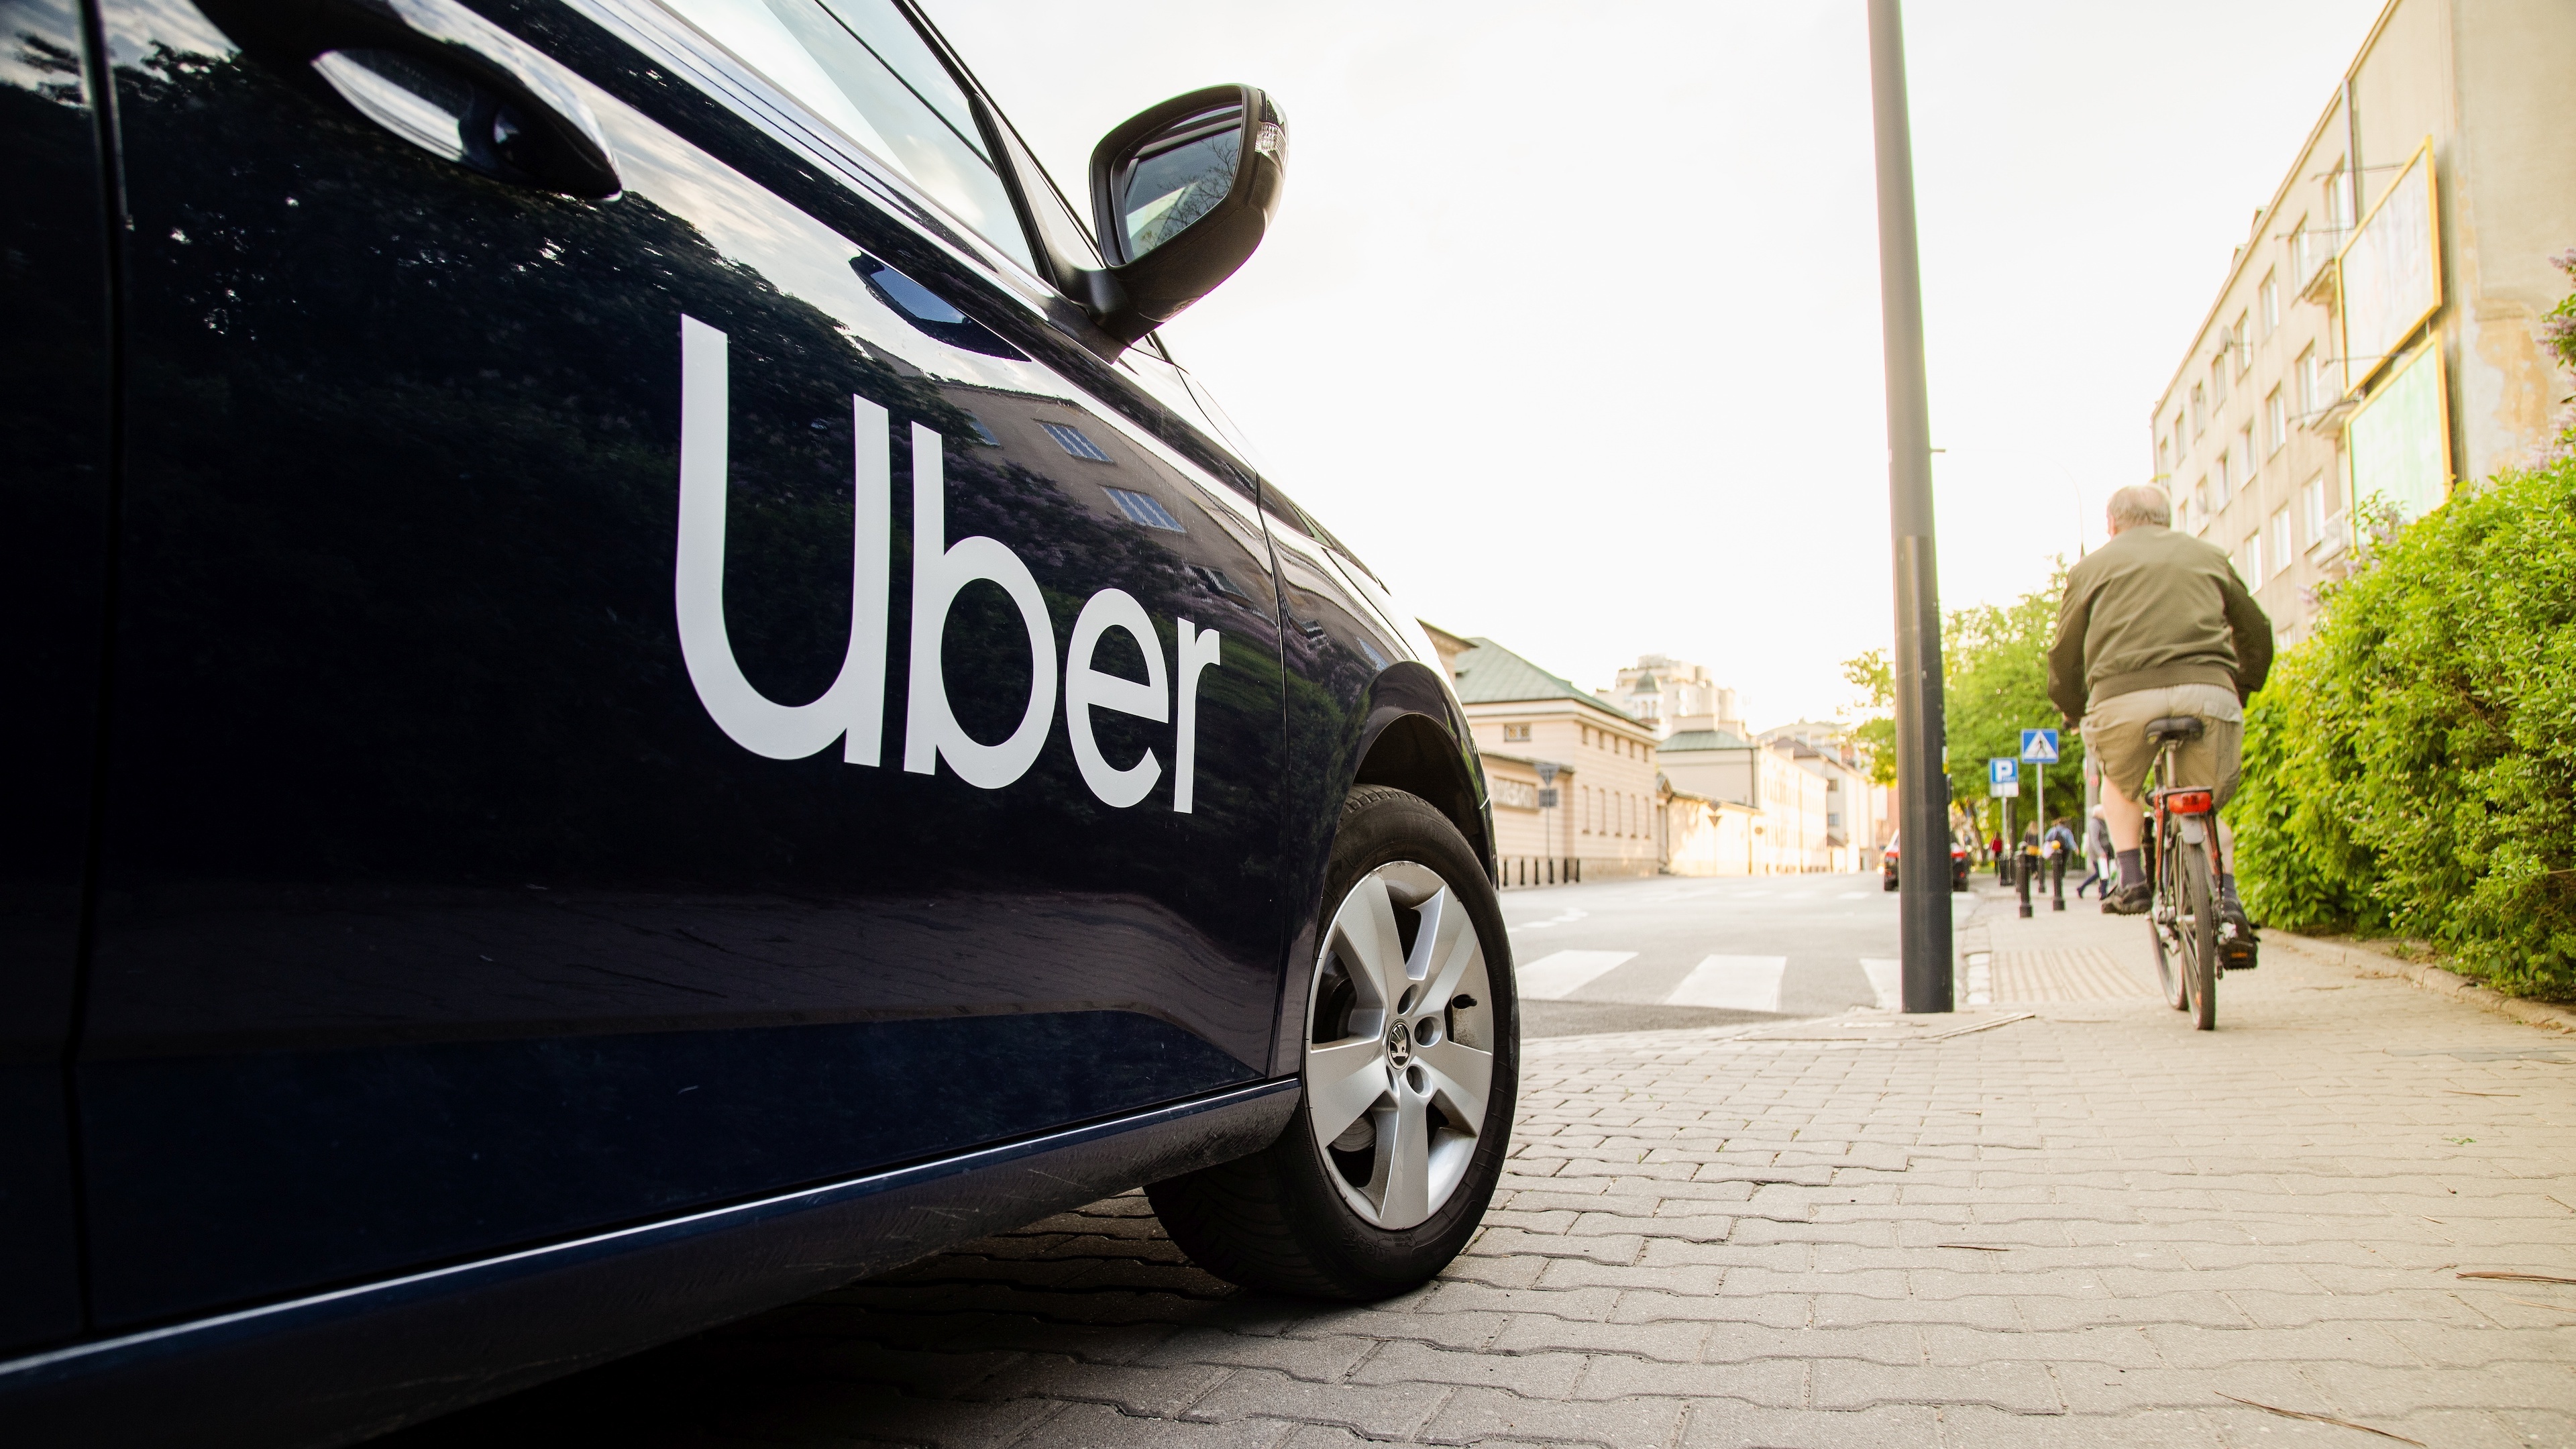 Uber: The world's largest ride-sharing company, Founded in 2009. 3840x2160 4K Wallpaper.